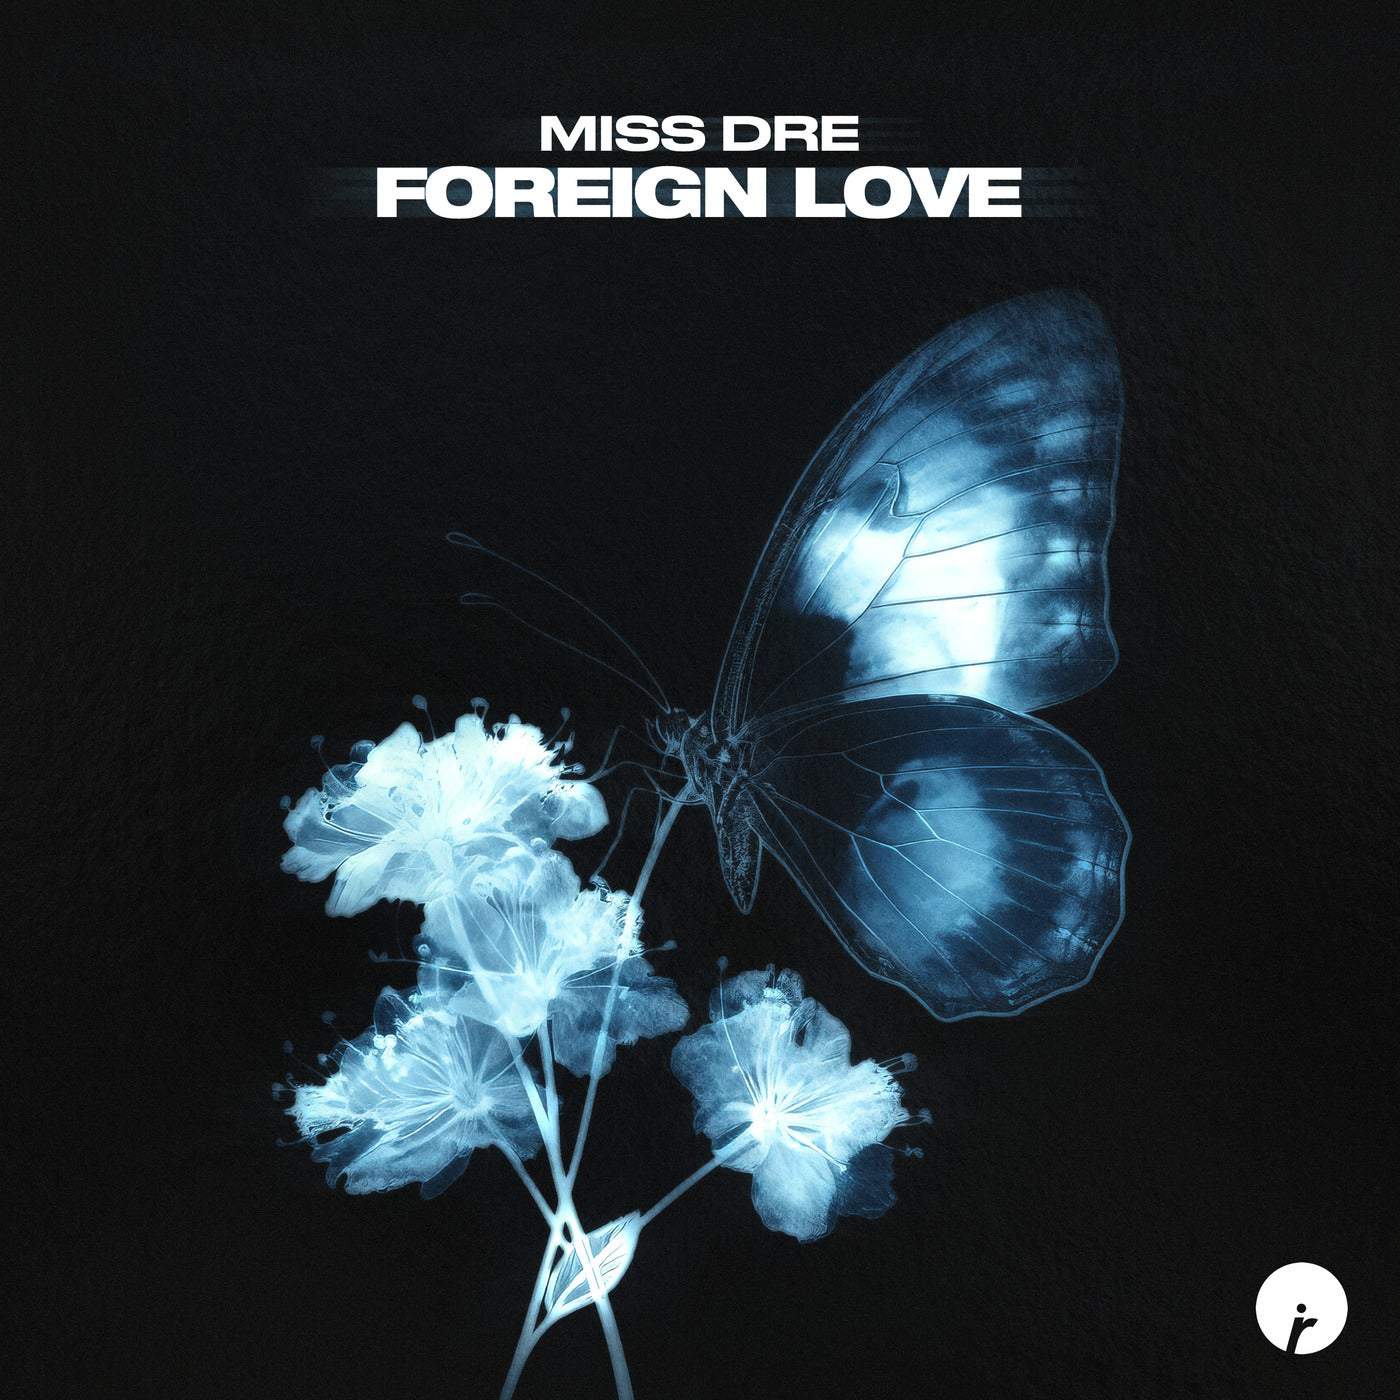 image cover: MISS DRE - Foreign Love on Insomniac Records